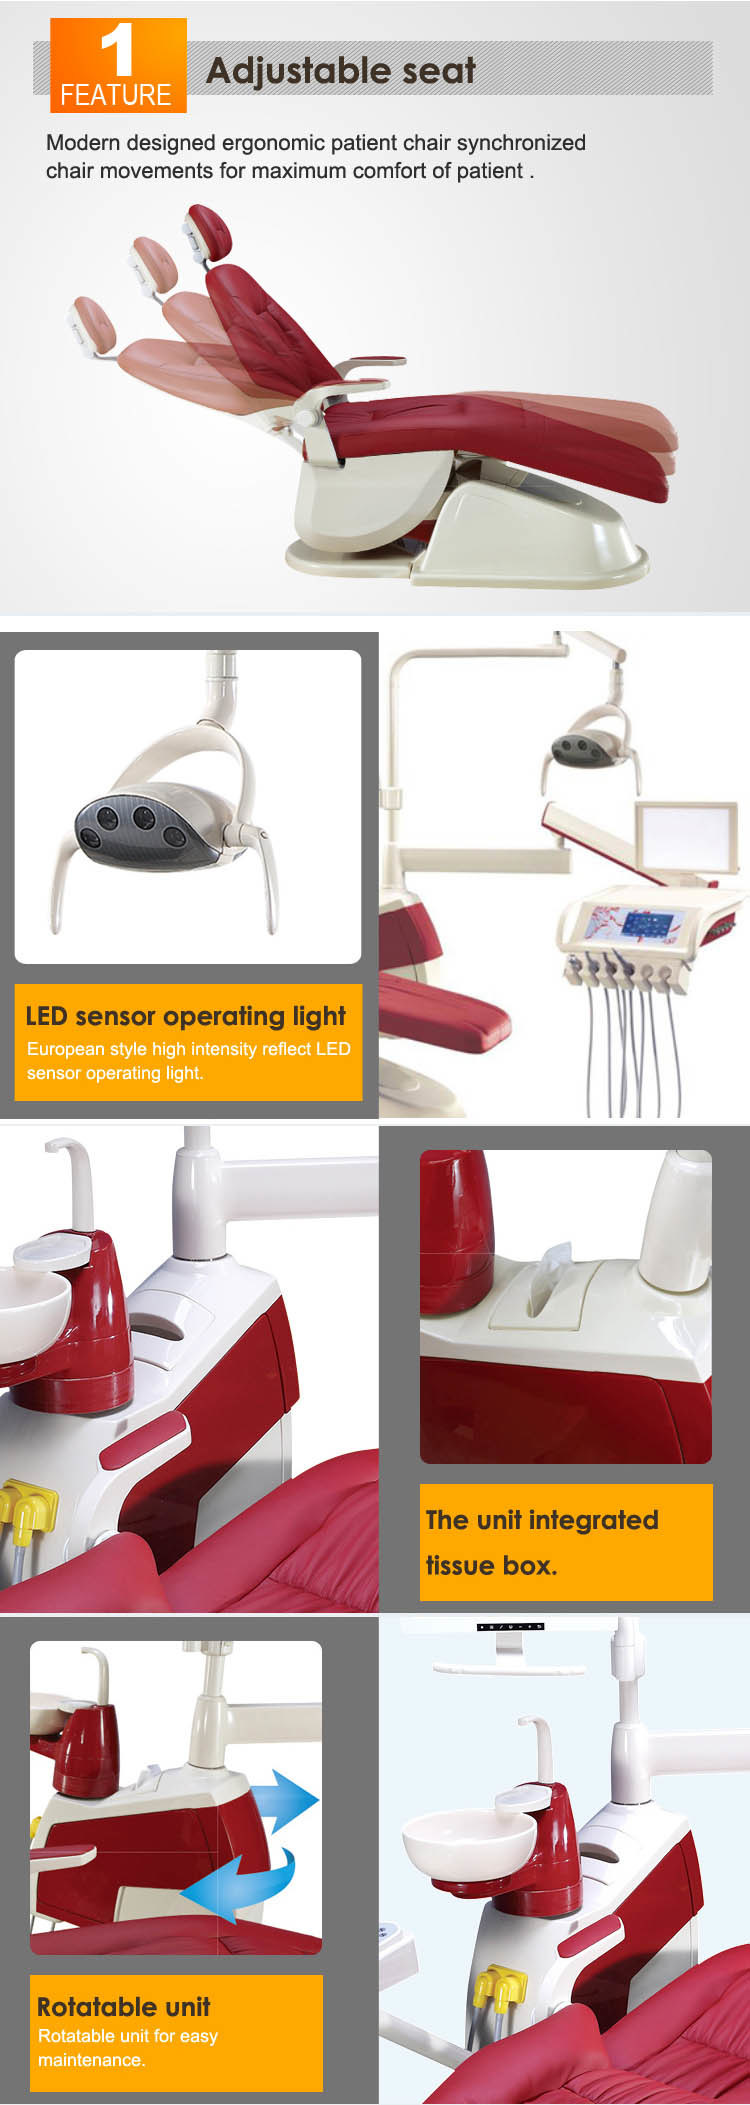 Big Sale Ce&FDA&ISO Approved Dental Chair Dentist Chair Name/Apple Dental Chair/Cn Dental Supply